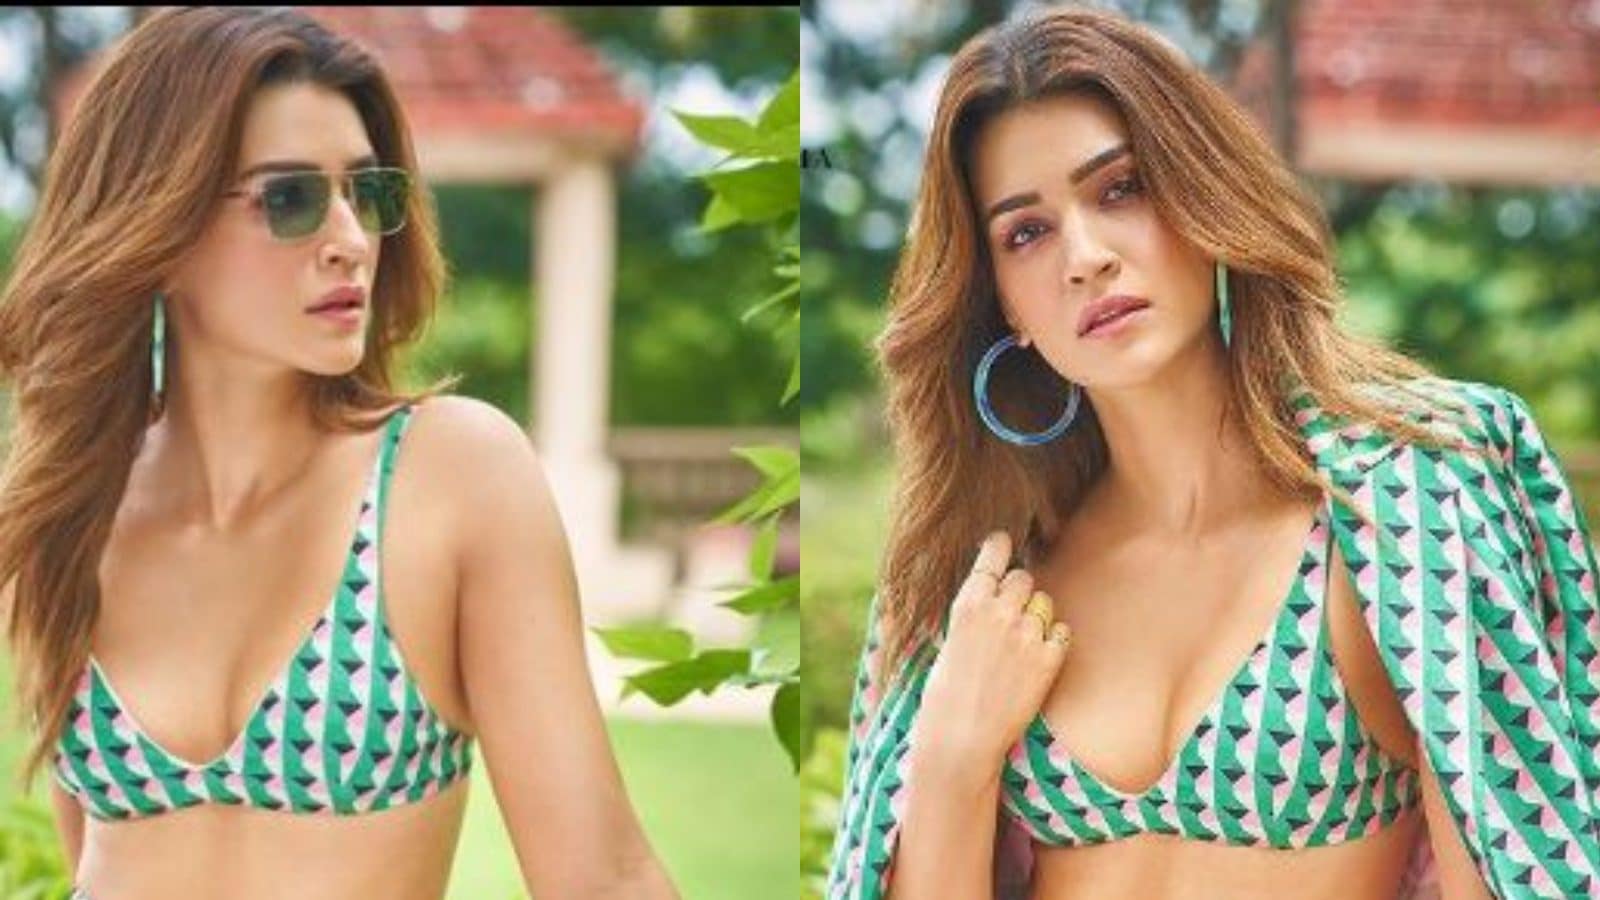 Kriti Sanon X X X Video - Kriti Sanon Looks Sensuous In Green Bralette as She Poses for Magazine  Cover, See Pictures - News18